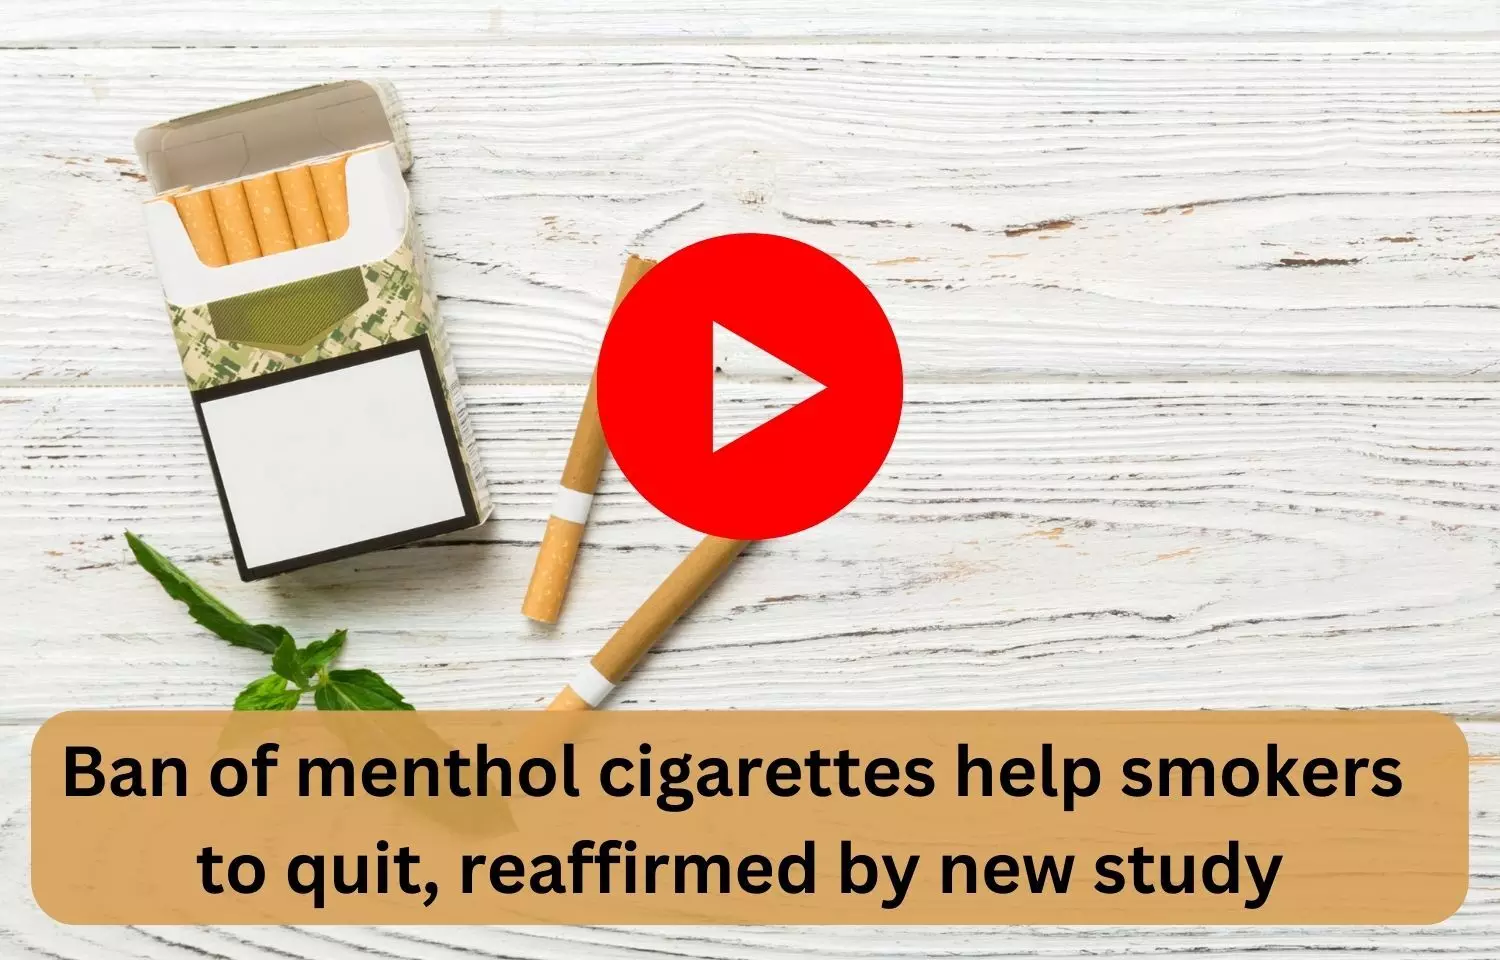 Ban of menthol cigarettes help smokers to quit, reaffirmed by new study